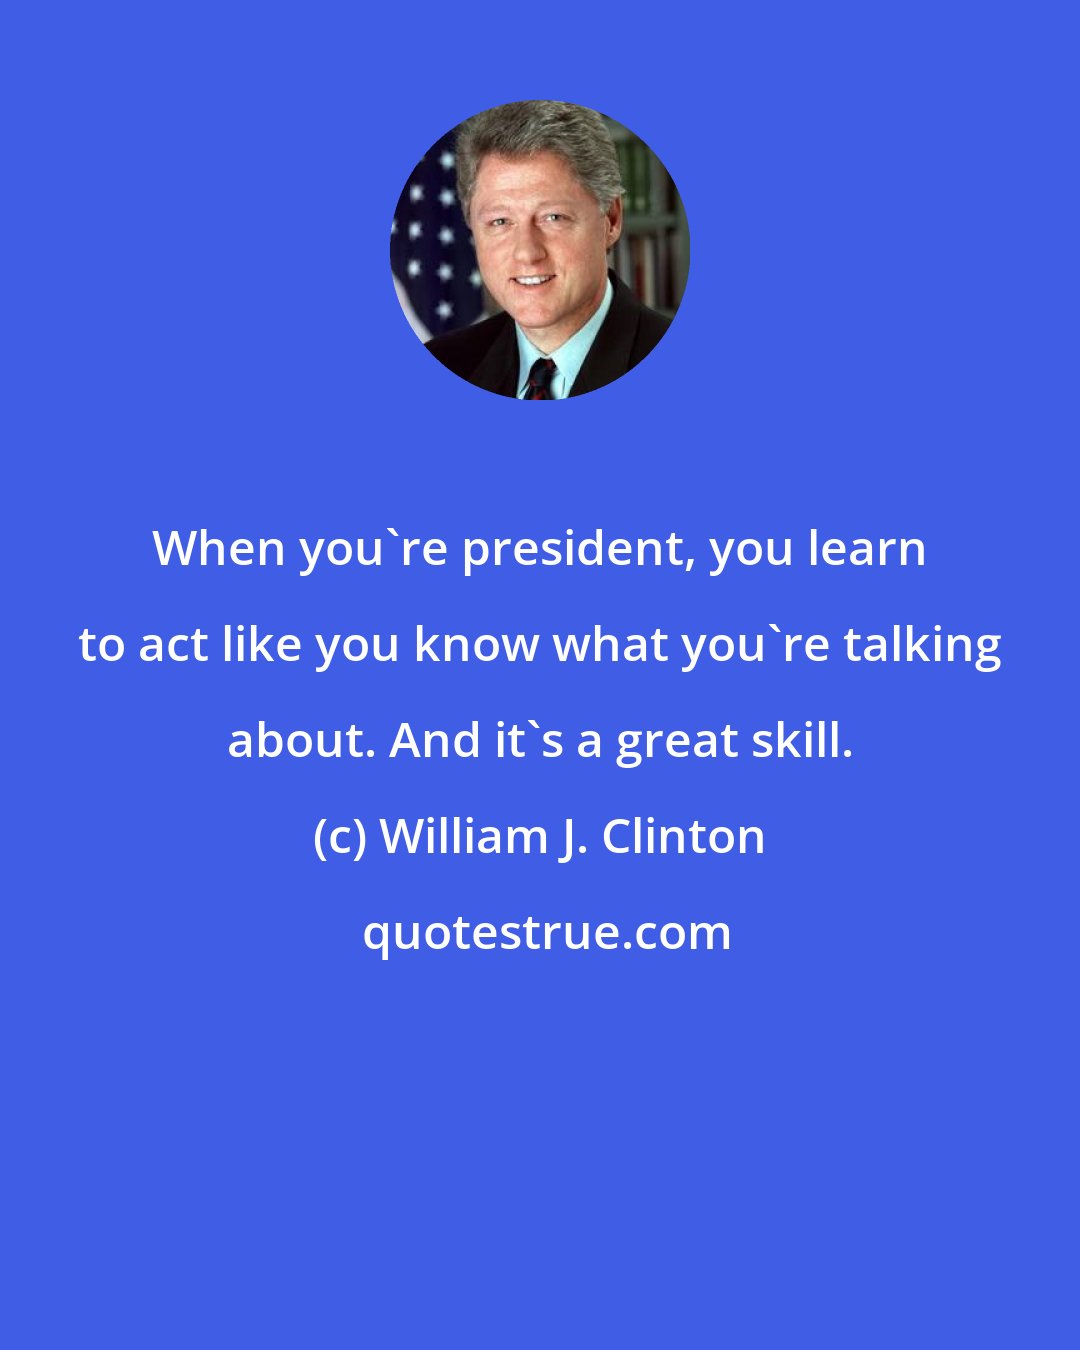 William J. Clinton: When you're president, you learn to act like you know what you're talking about. And it's a great skill.